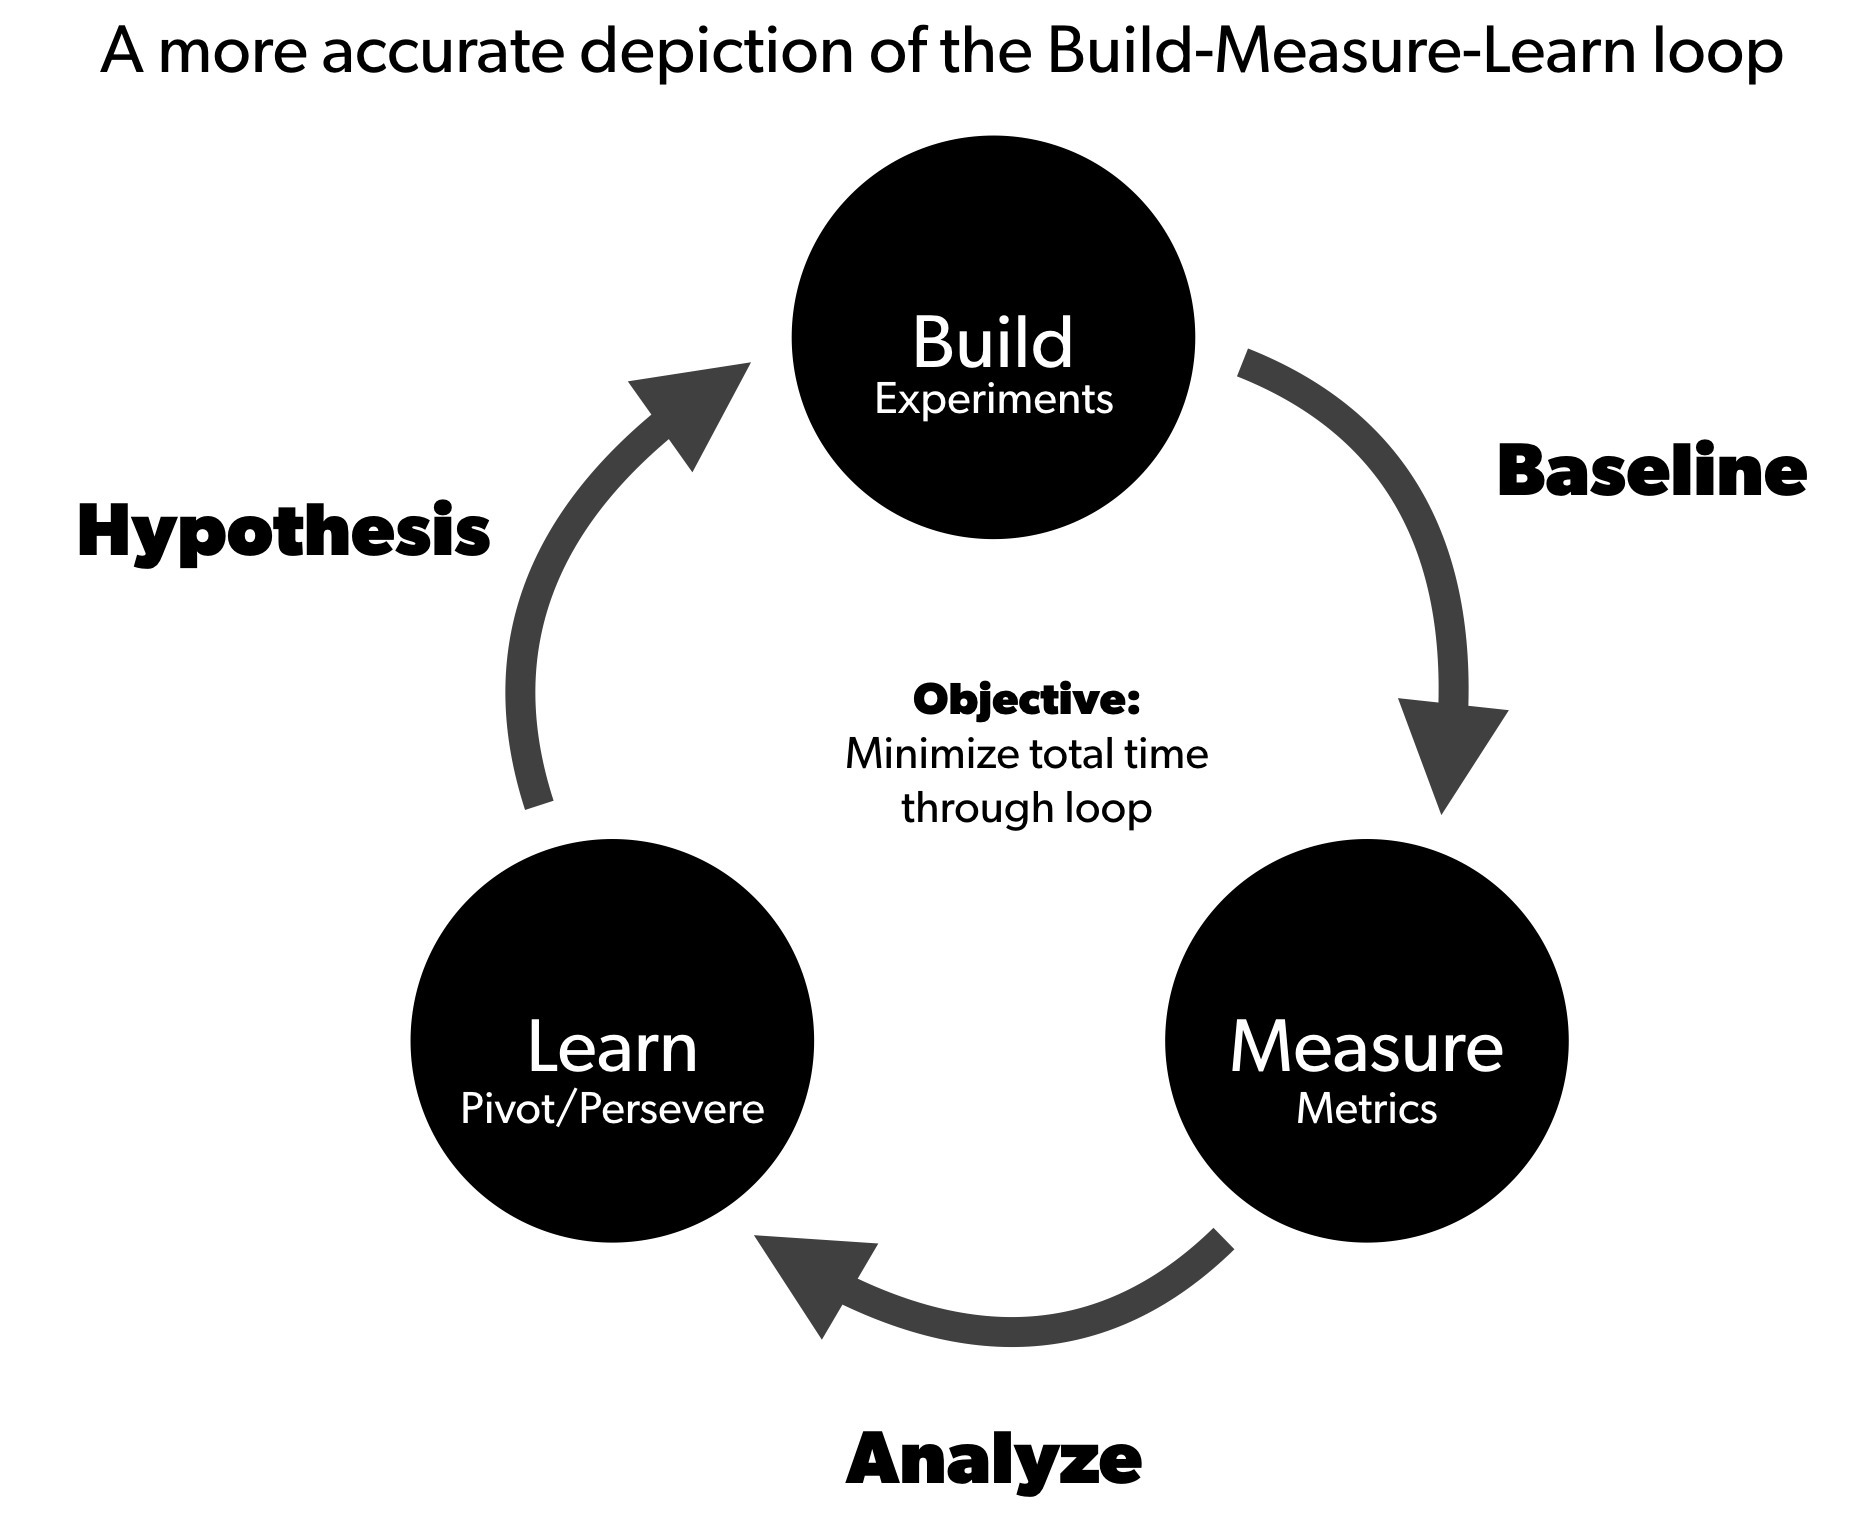 A more accurate depiction of the Build-Measure-Learn loop